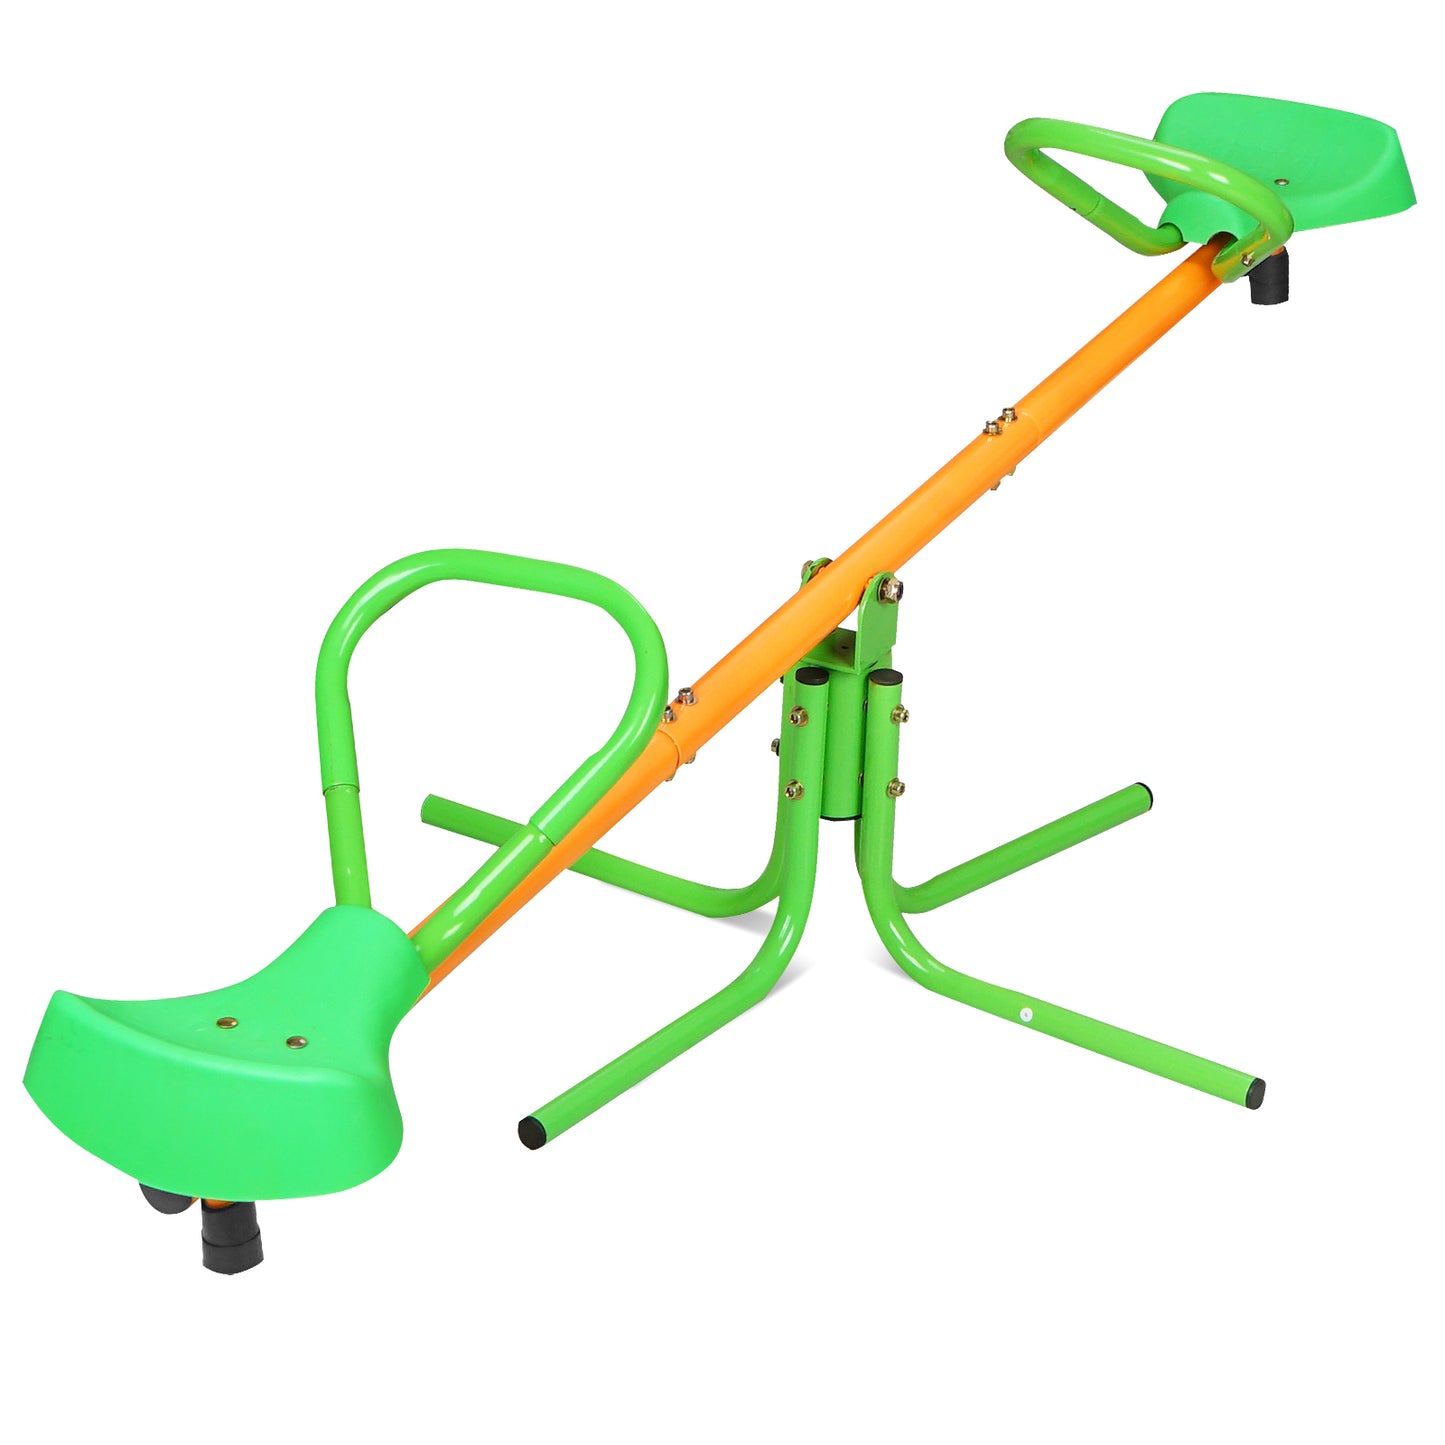 360 Degree Rotation Outdoor Kids Spinning Seesaw Sit and Spin Teeter Totter - Playground Equipment for Backyard - Swivel Teeter Totter with 360° Rotation Capability